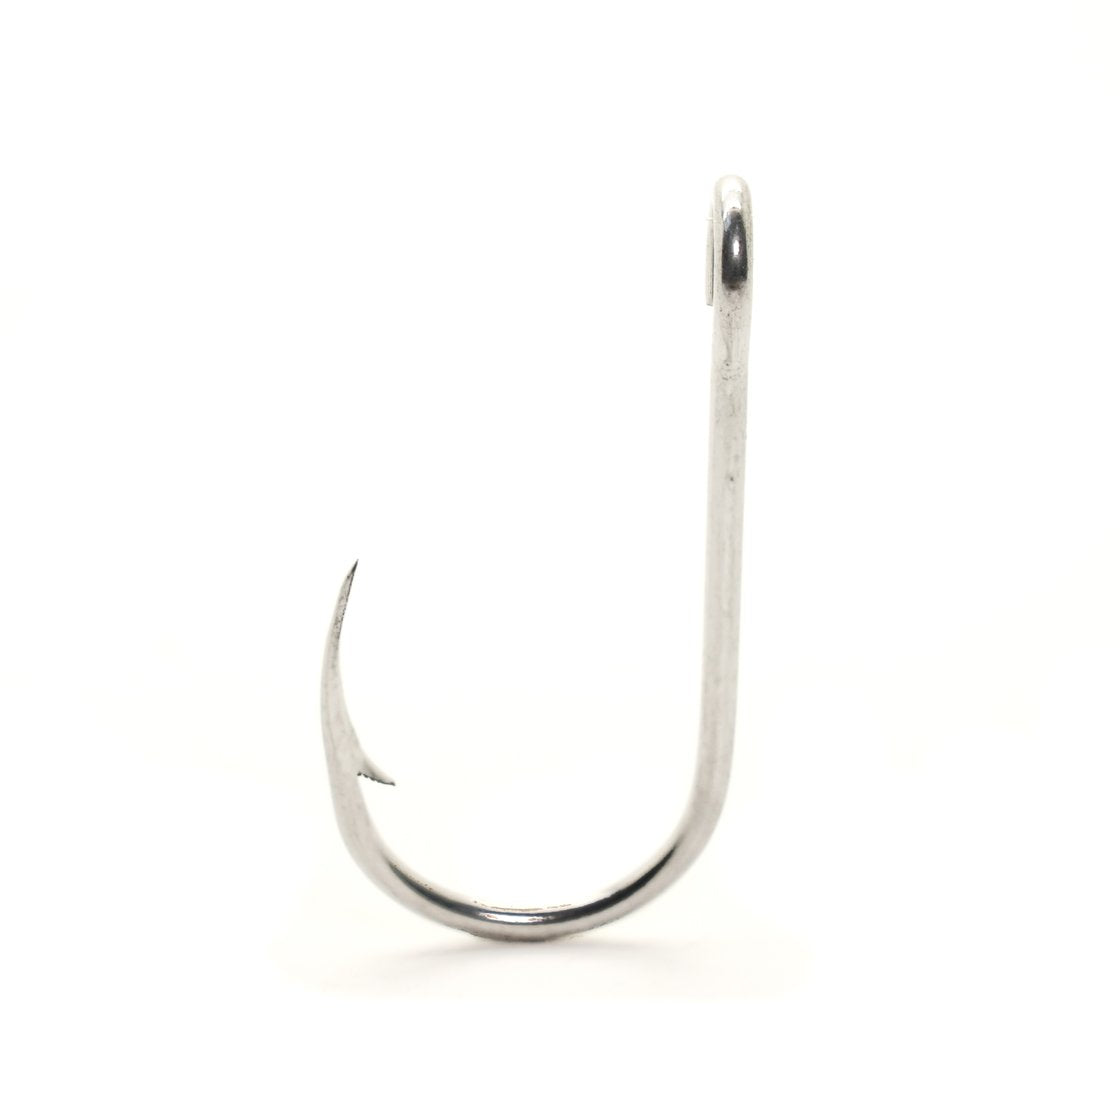 North Pacific Barbless Tin Clawpoint Hooks (25 pack)